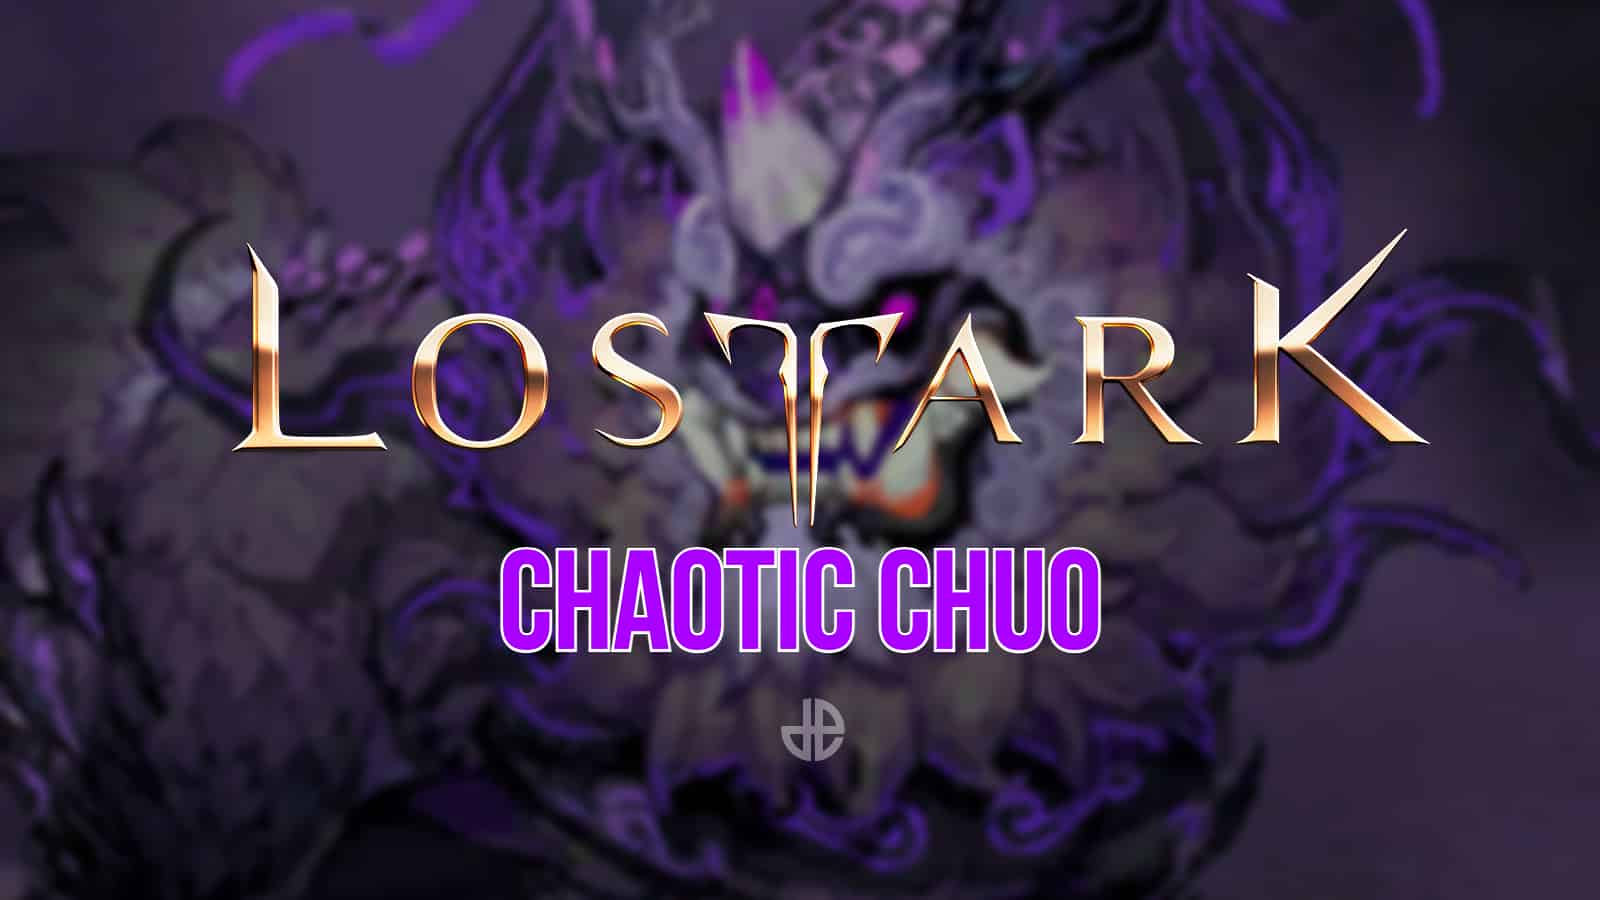 lost ark chaotic chuo guide image location spawn rate rewards